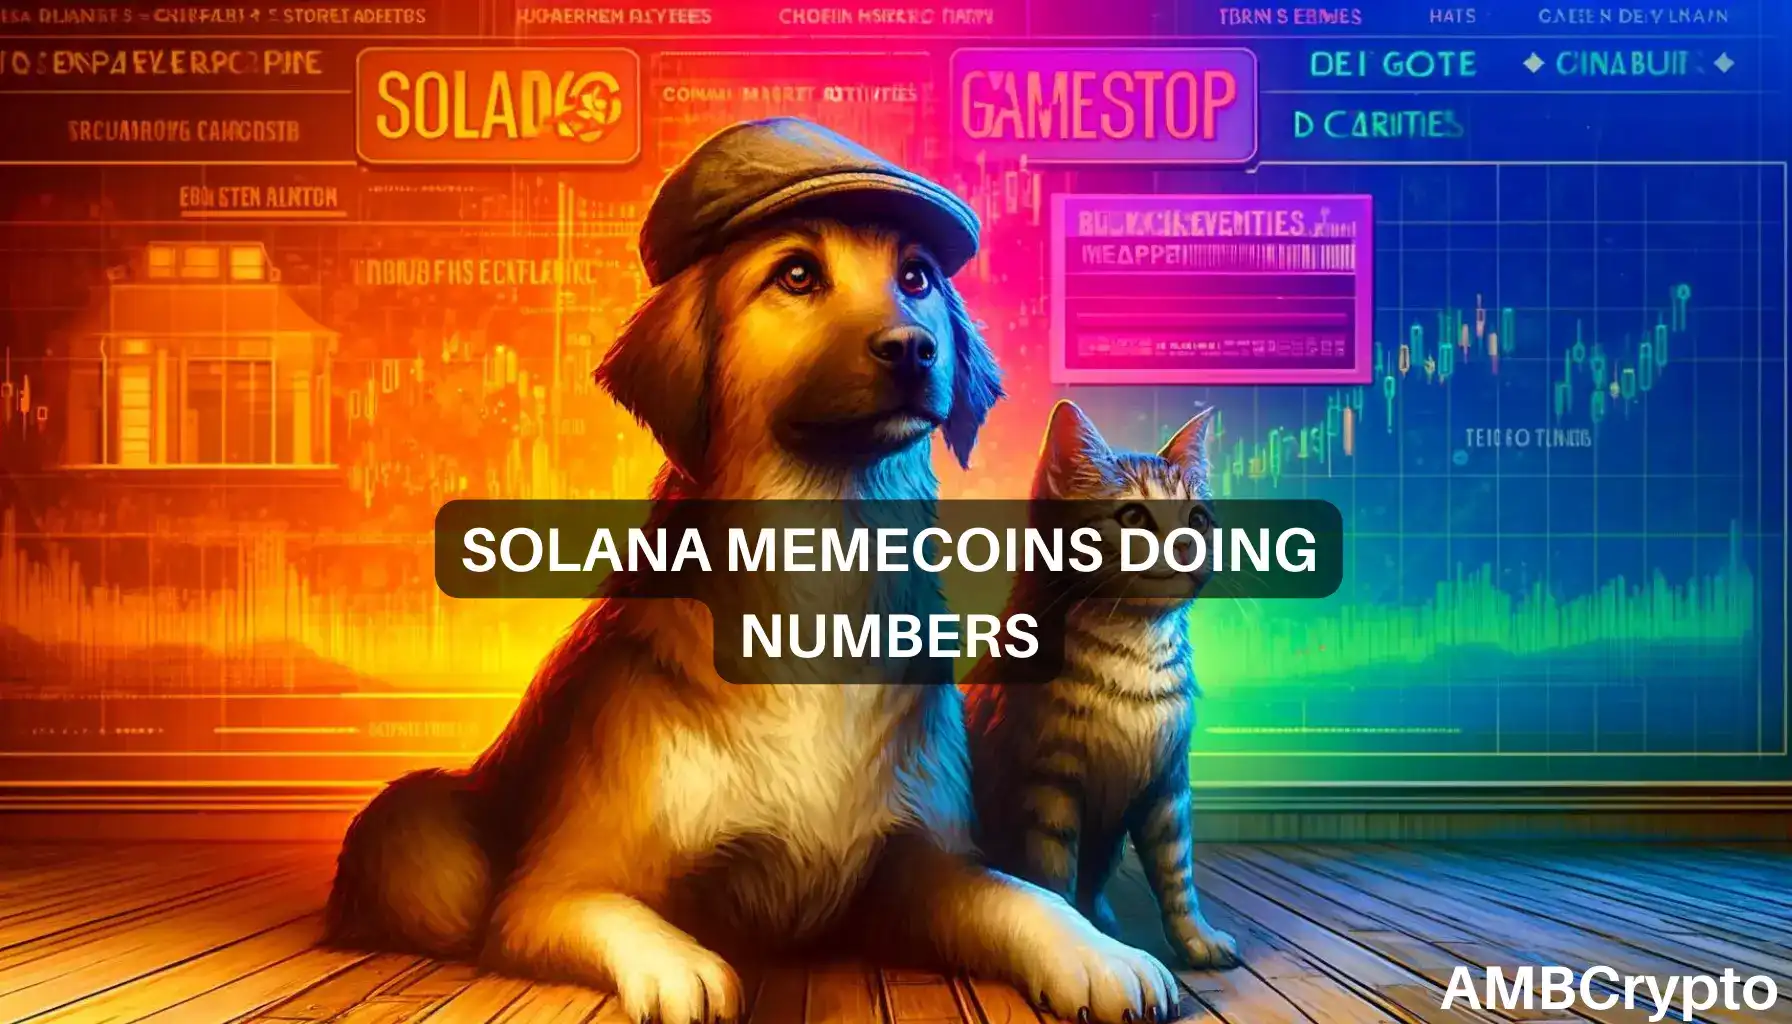 What’s next for Solana memecoins as GameStop causes historic surge?